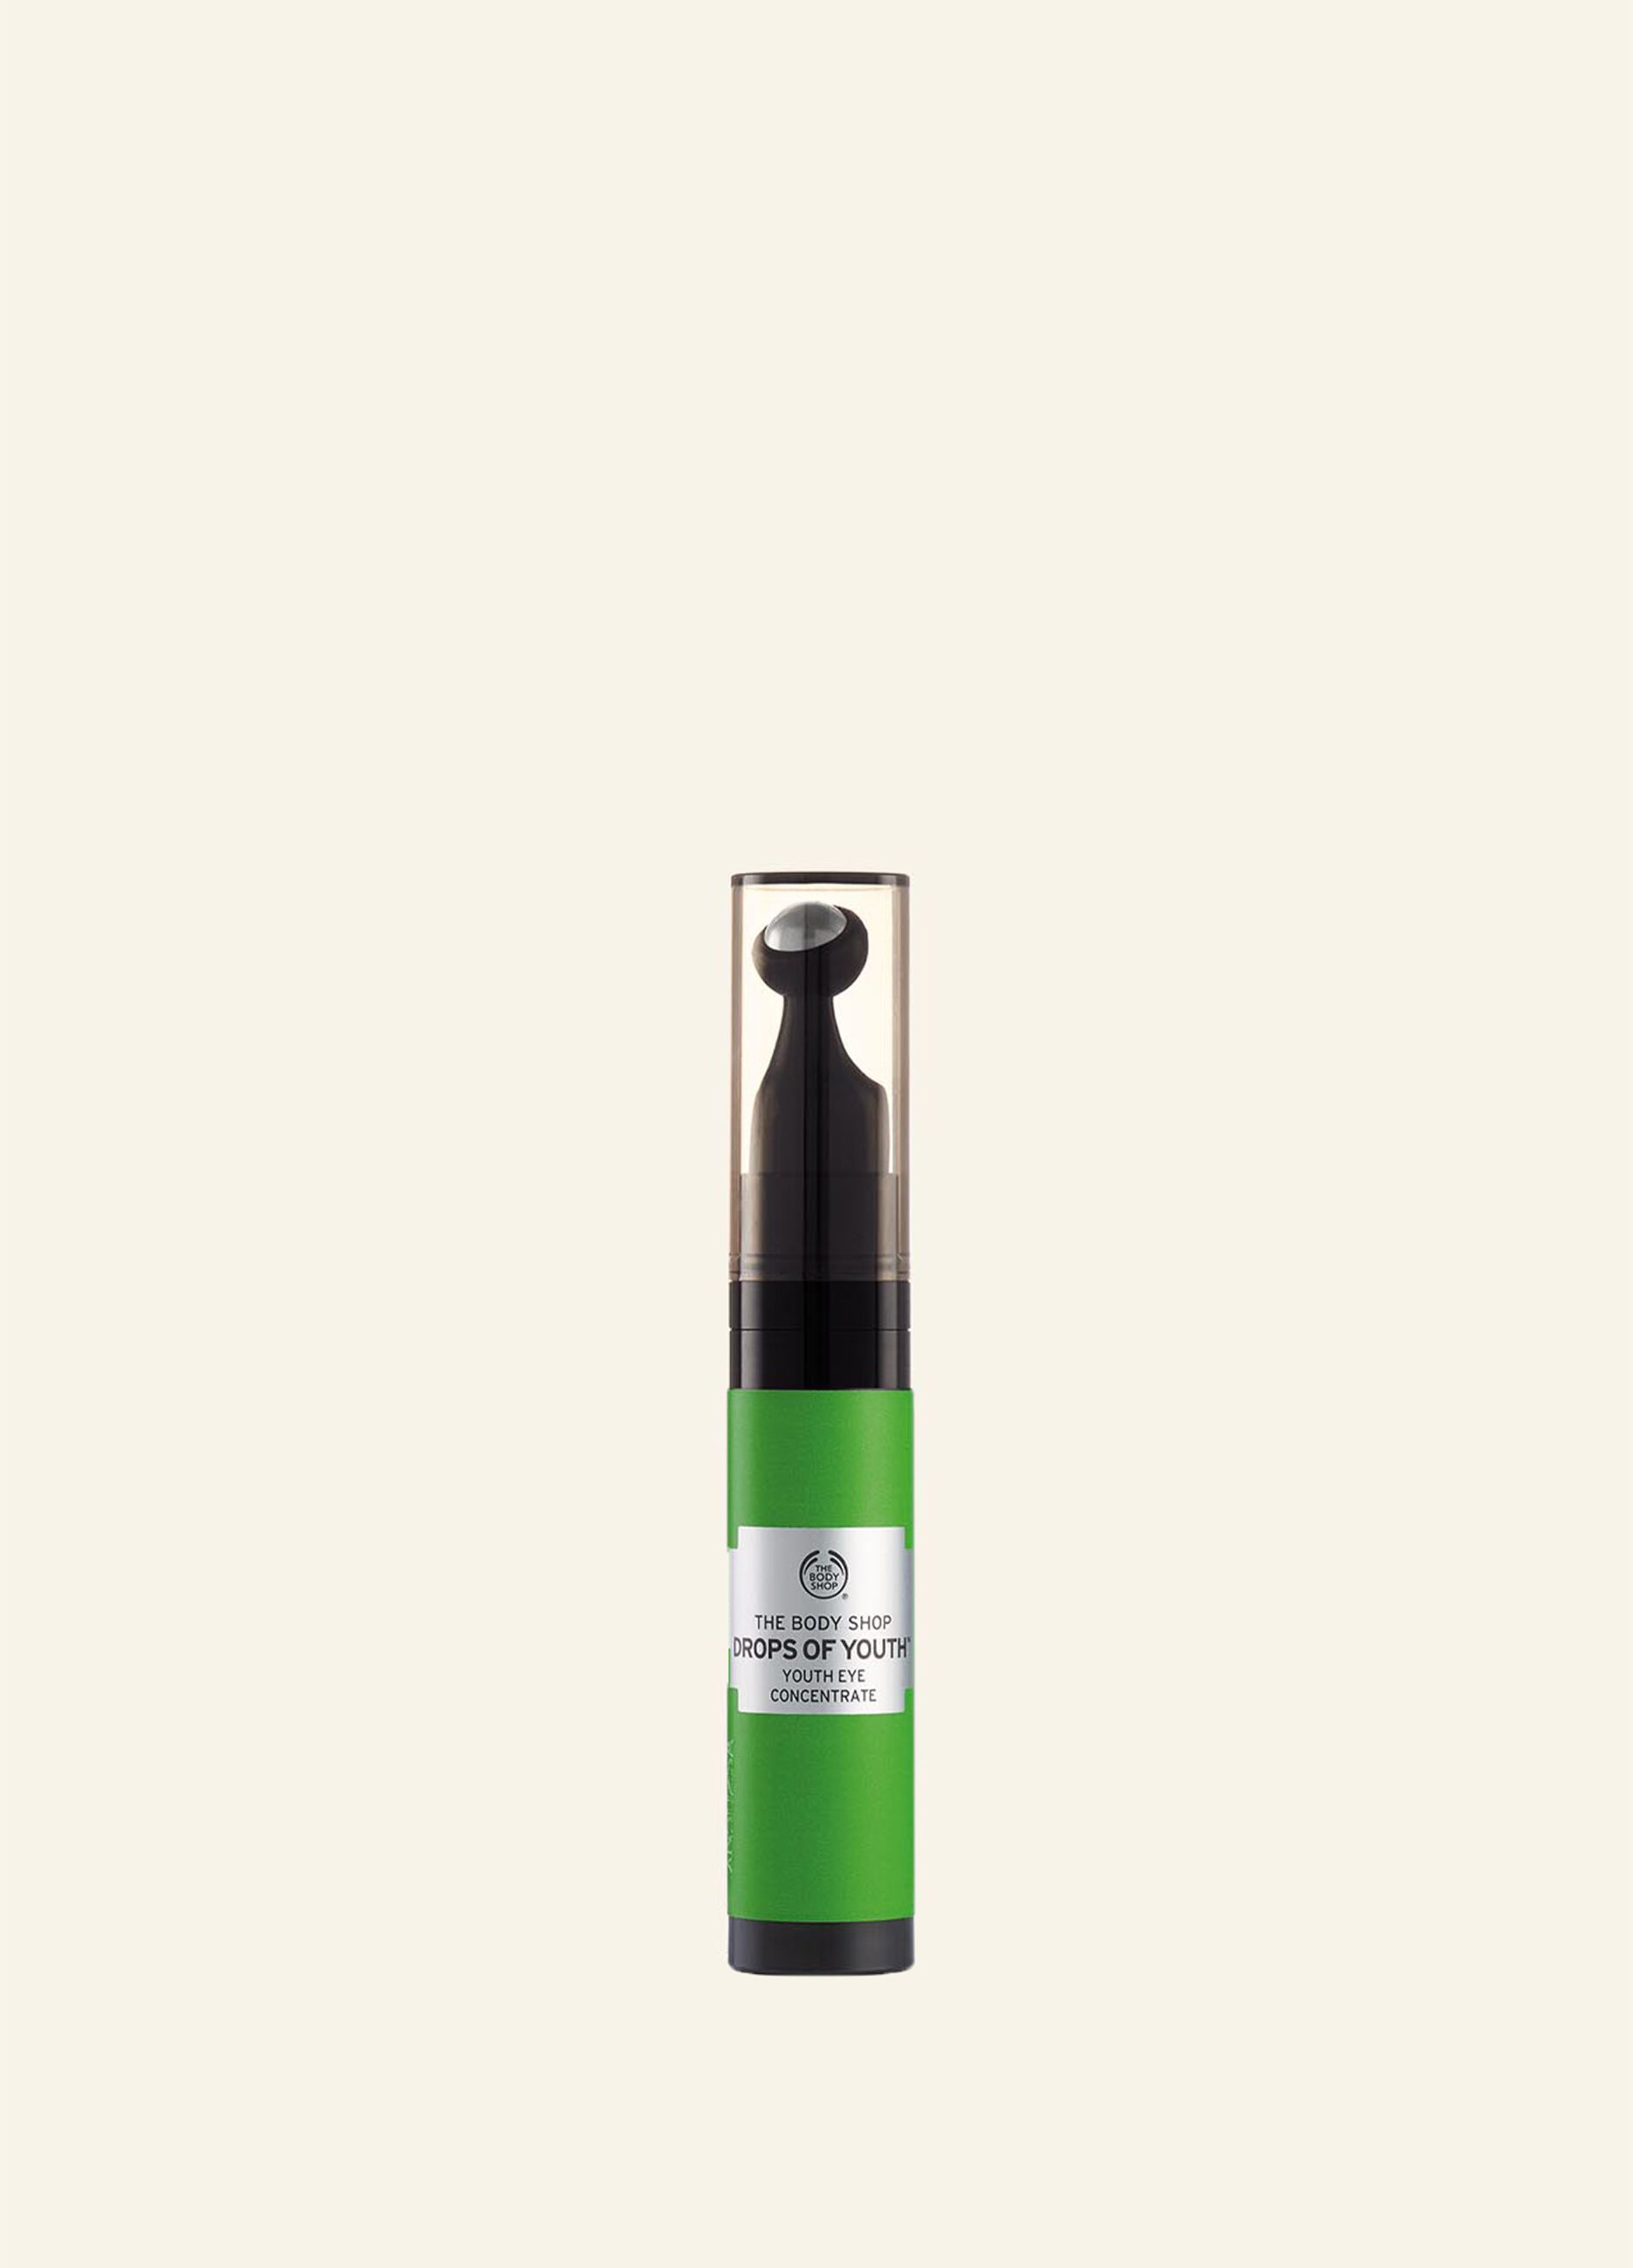 The Body Shop Drops Of Youth™ eye concentrate